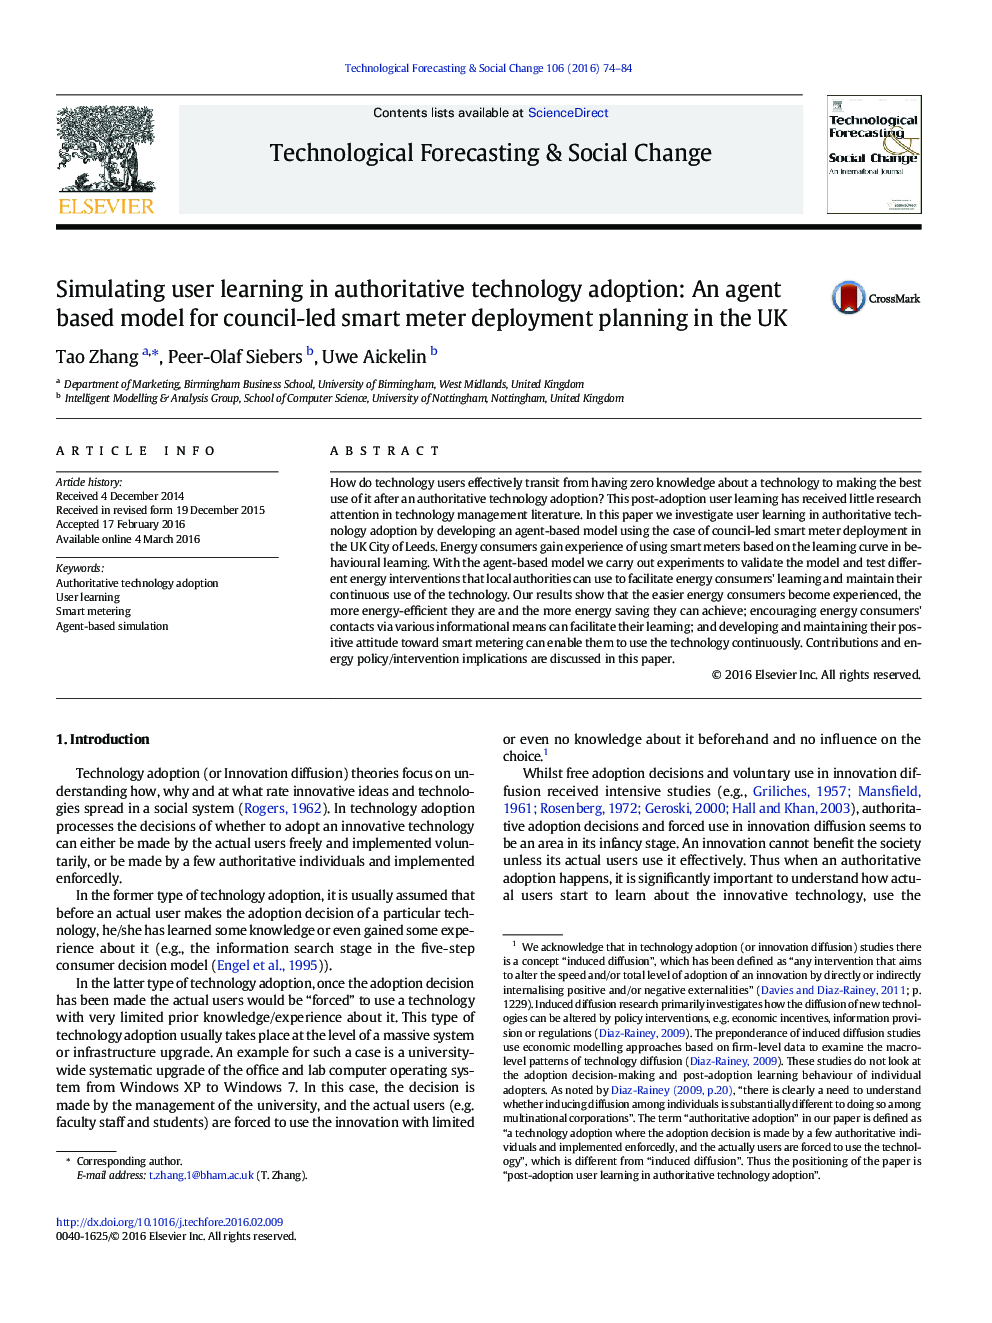 Simulating user learning in authoritative technology adoption: An agent based model for council-led smart meter deployment planning in the UK